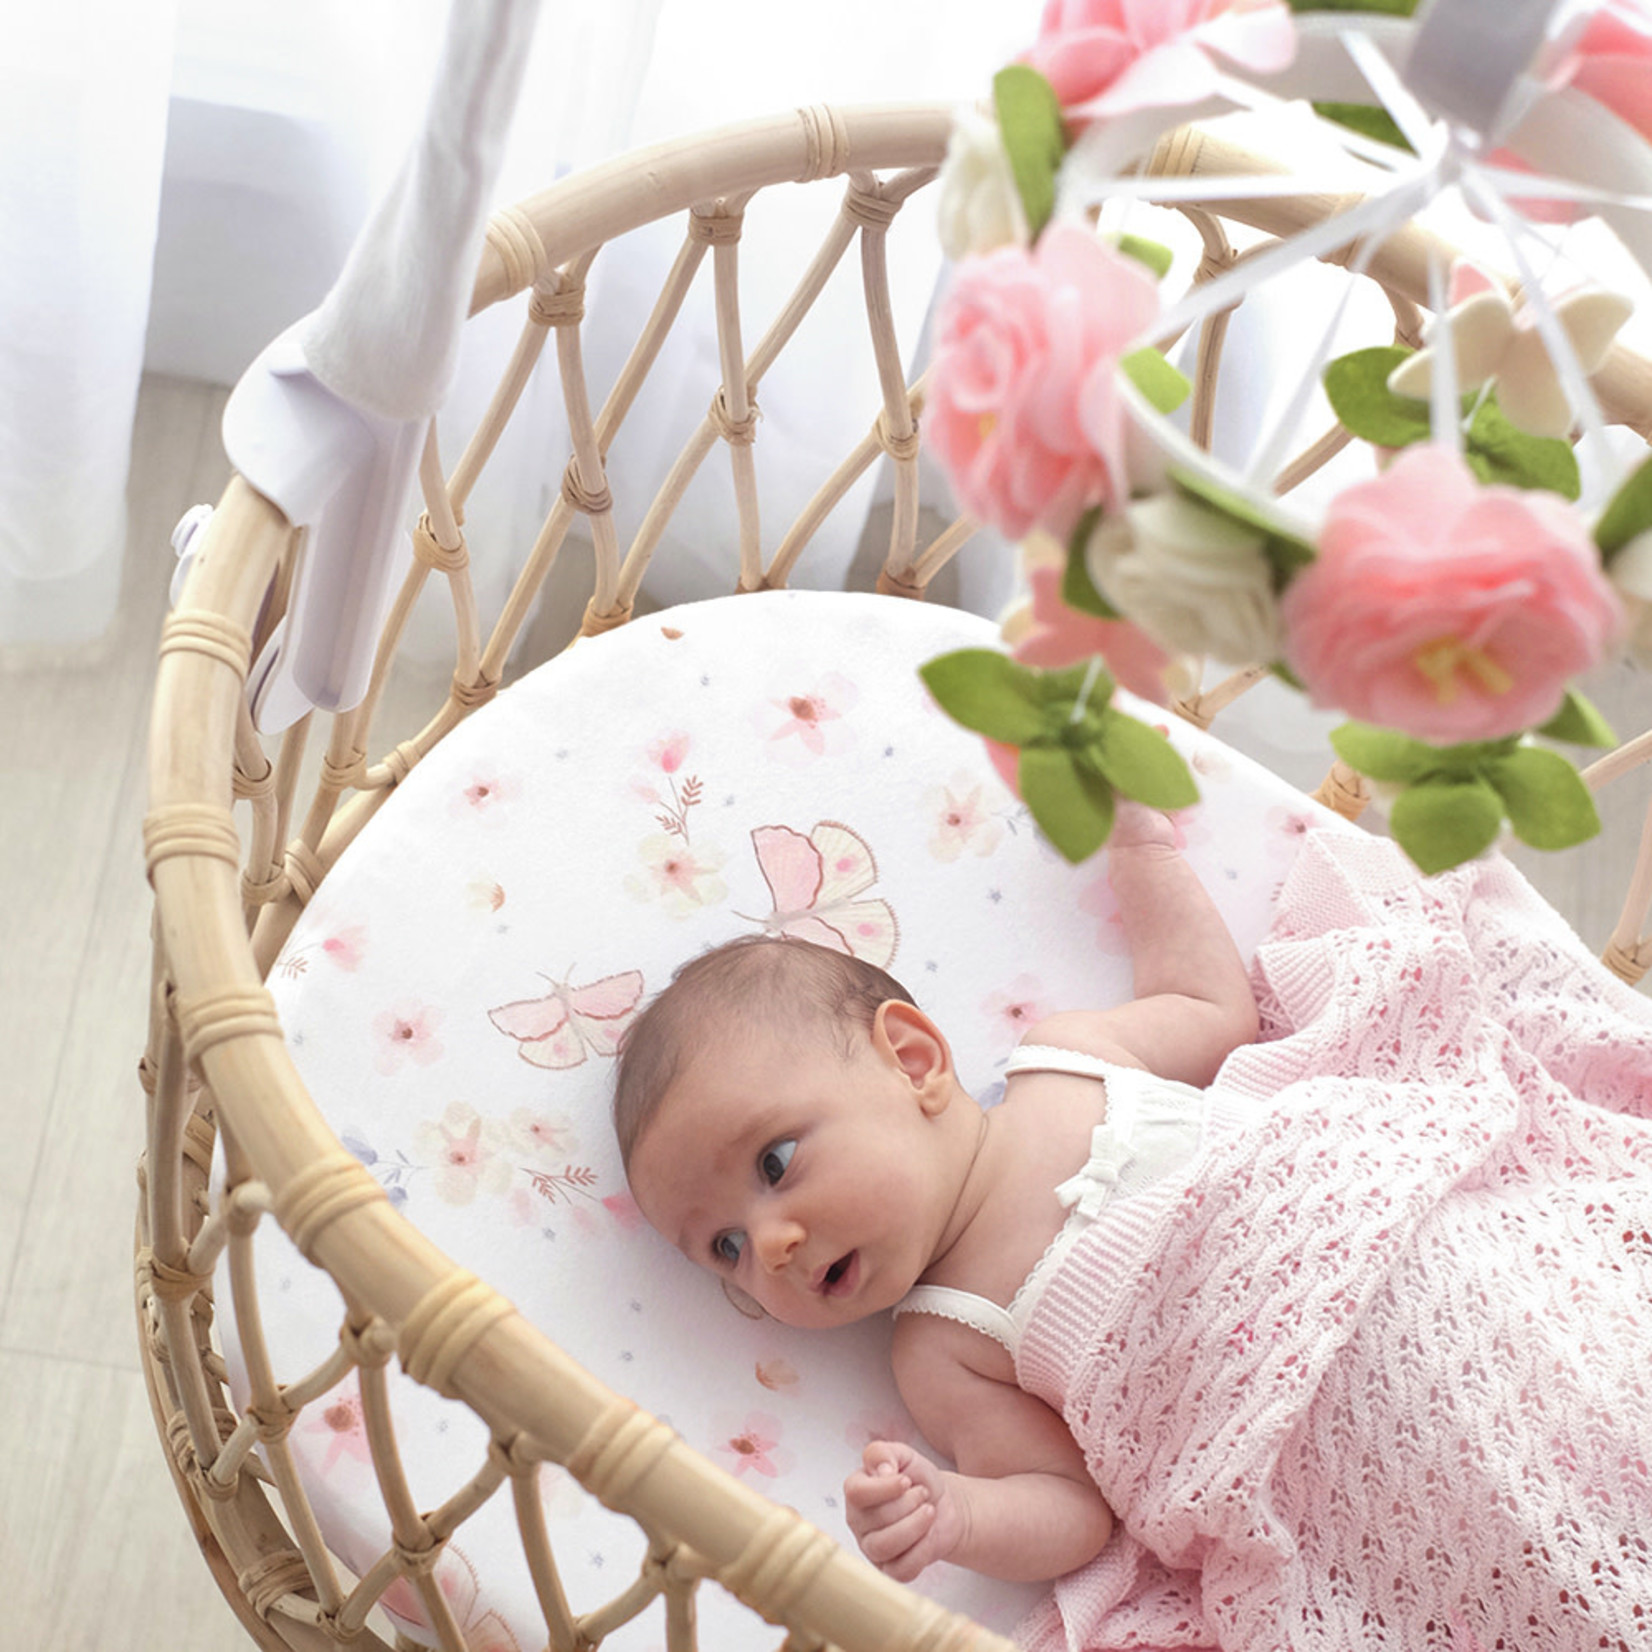 Living Textiles 2pk Bassinet Fitted Sheets-Butterfly/Blush Gingham